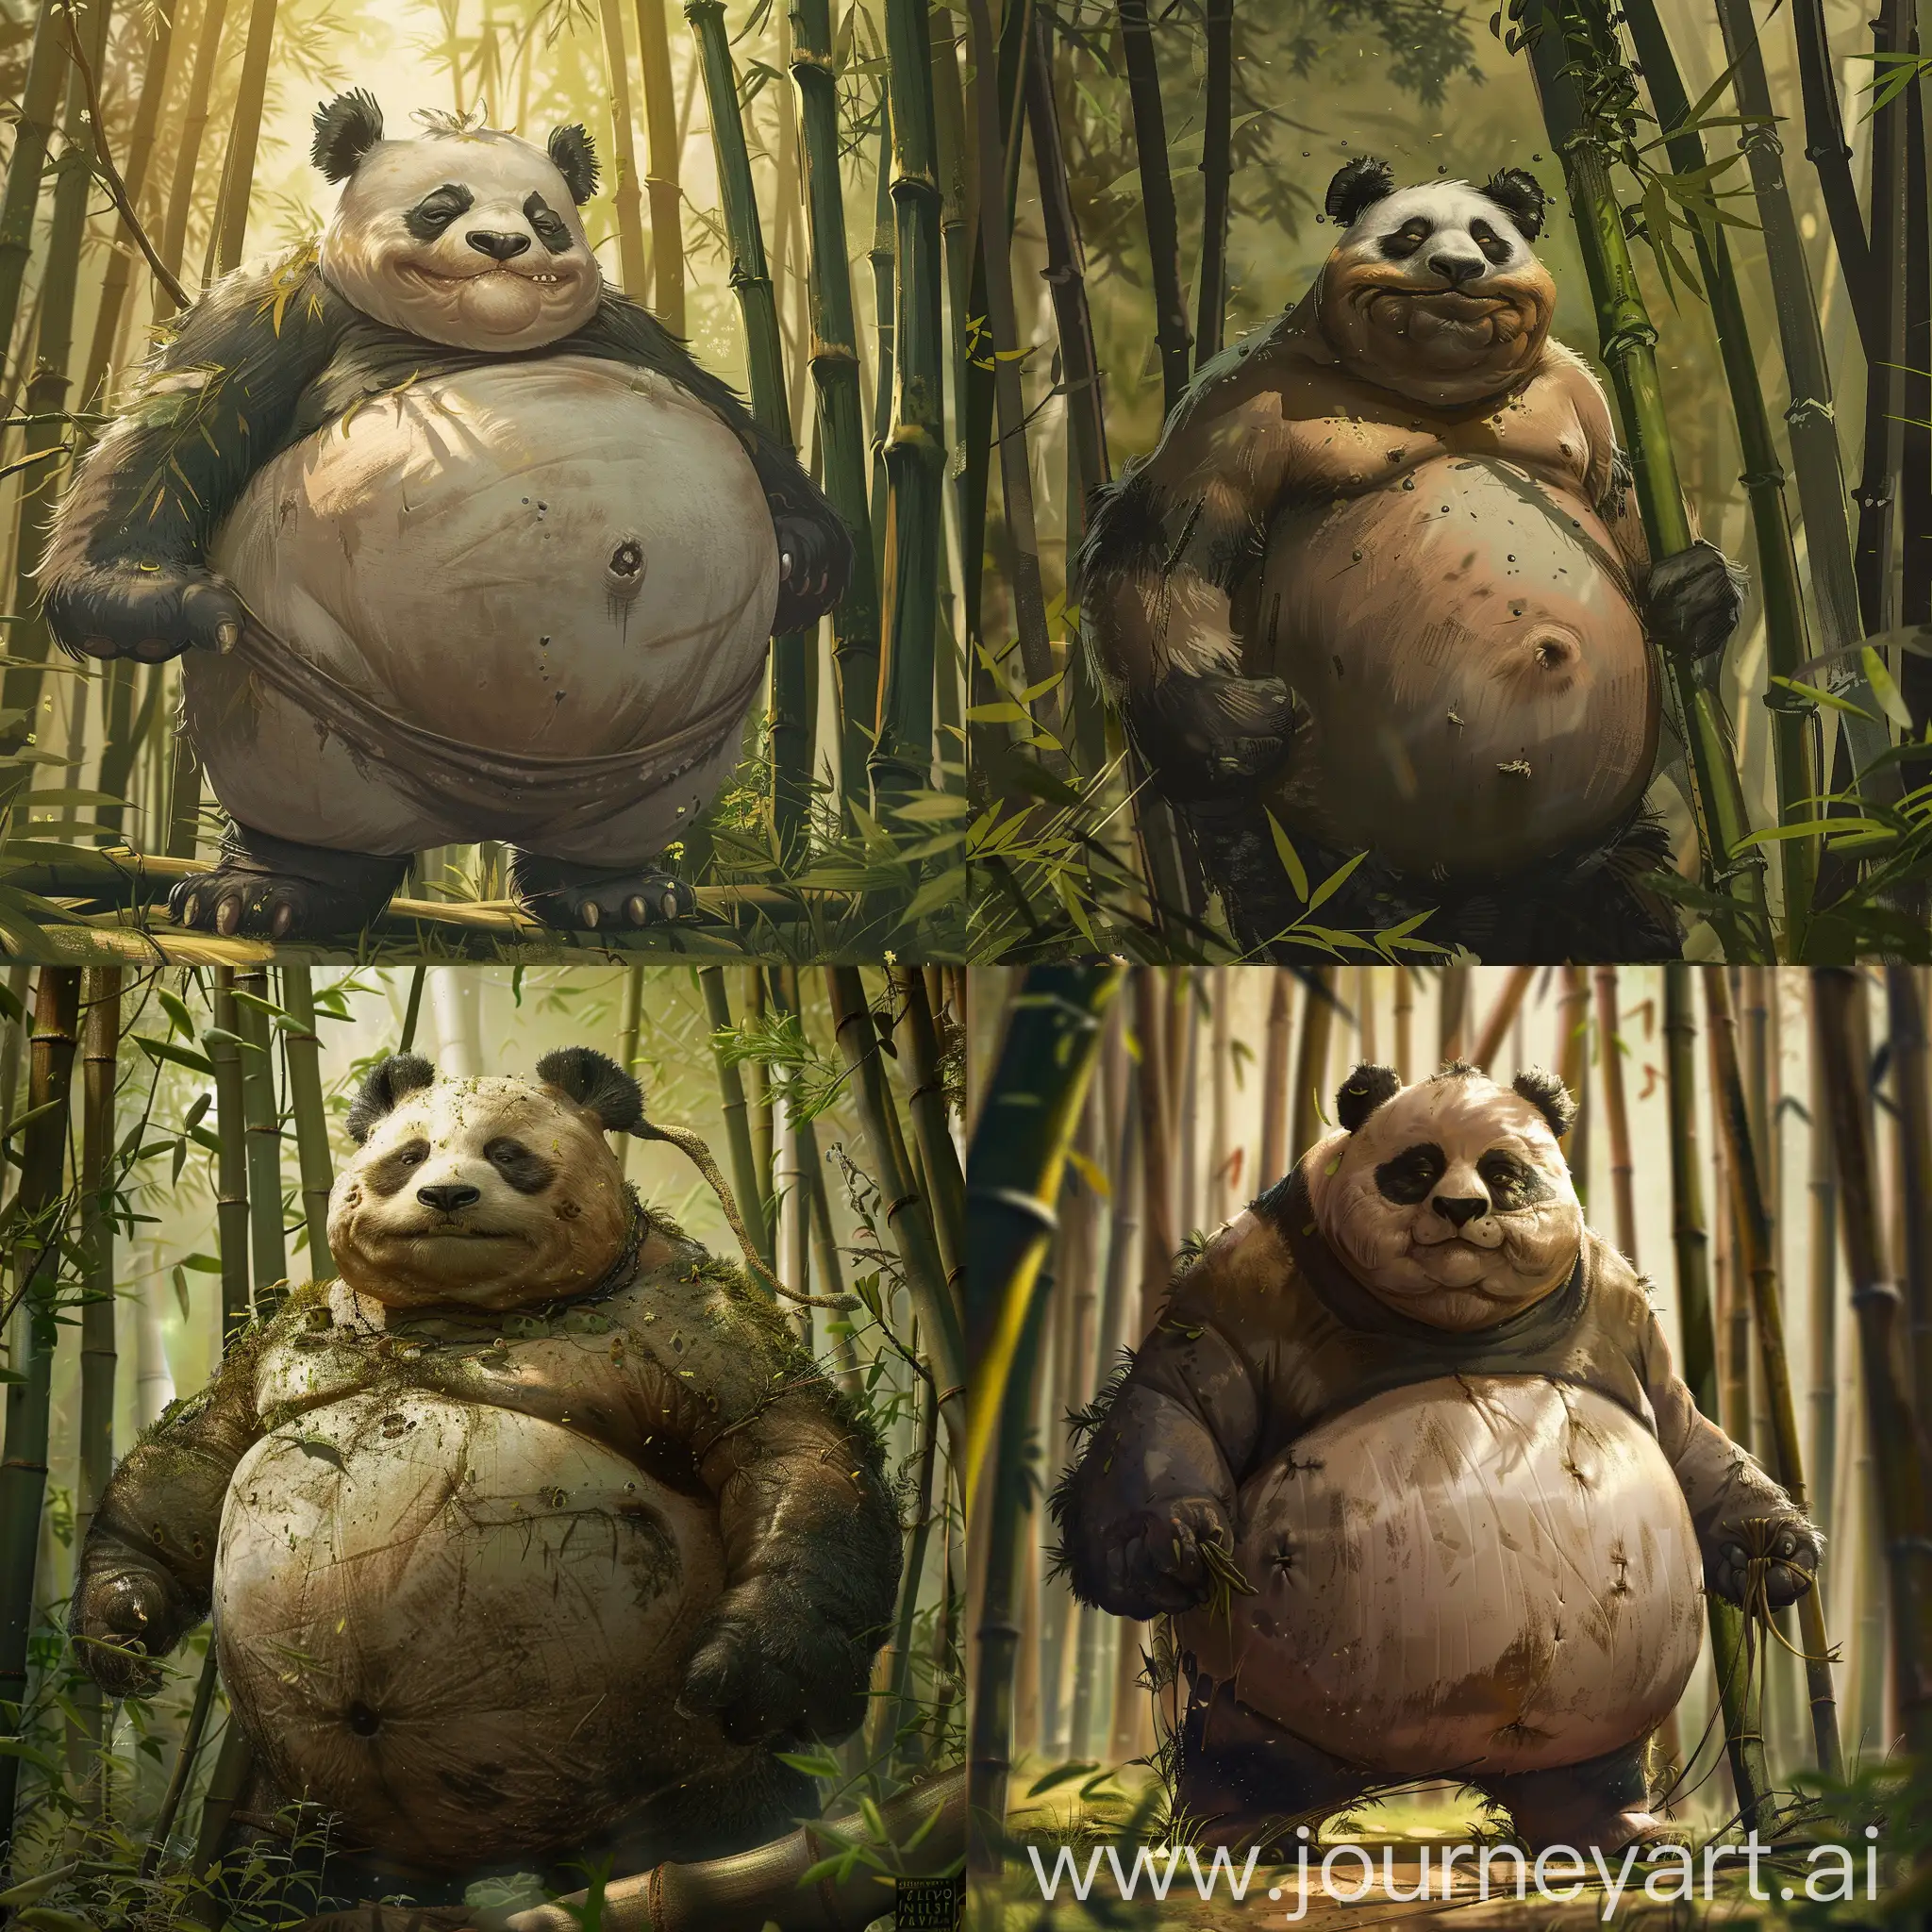 Pendo-the-Rotund-Panda-A-Charming-Encounter-in-the-Bamboo-Haven